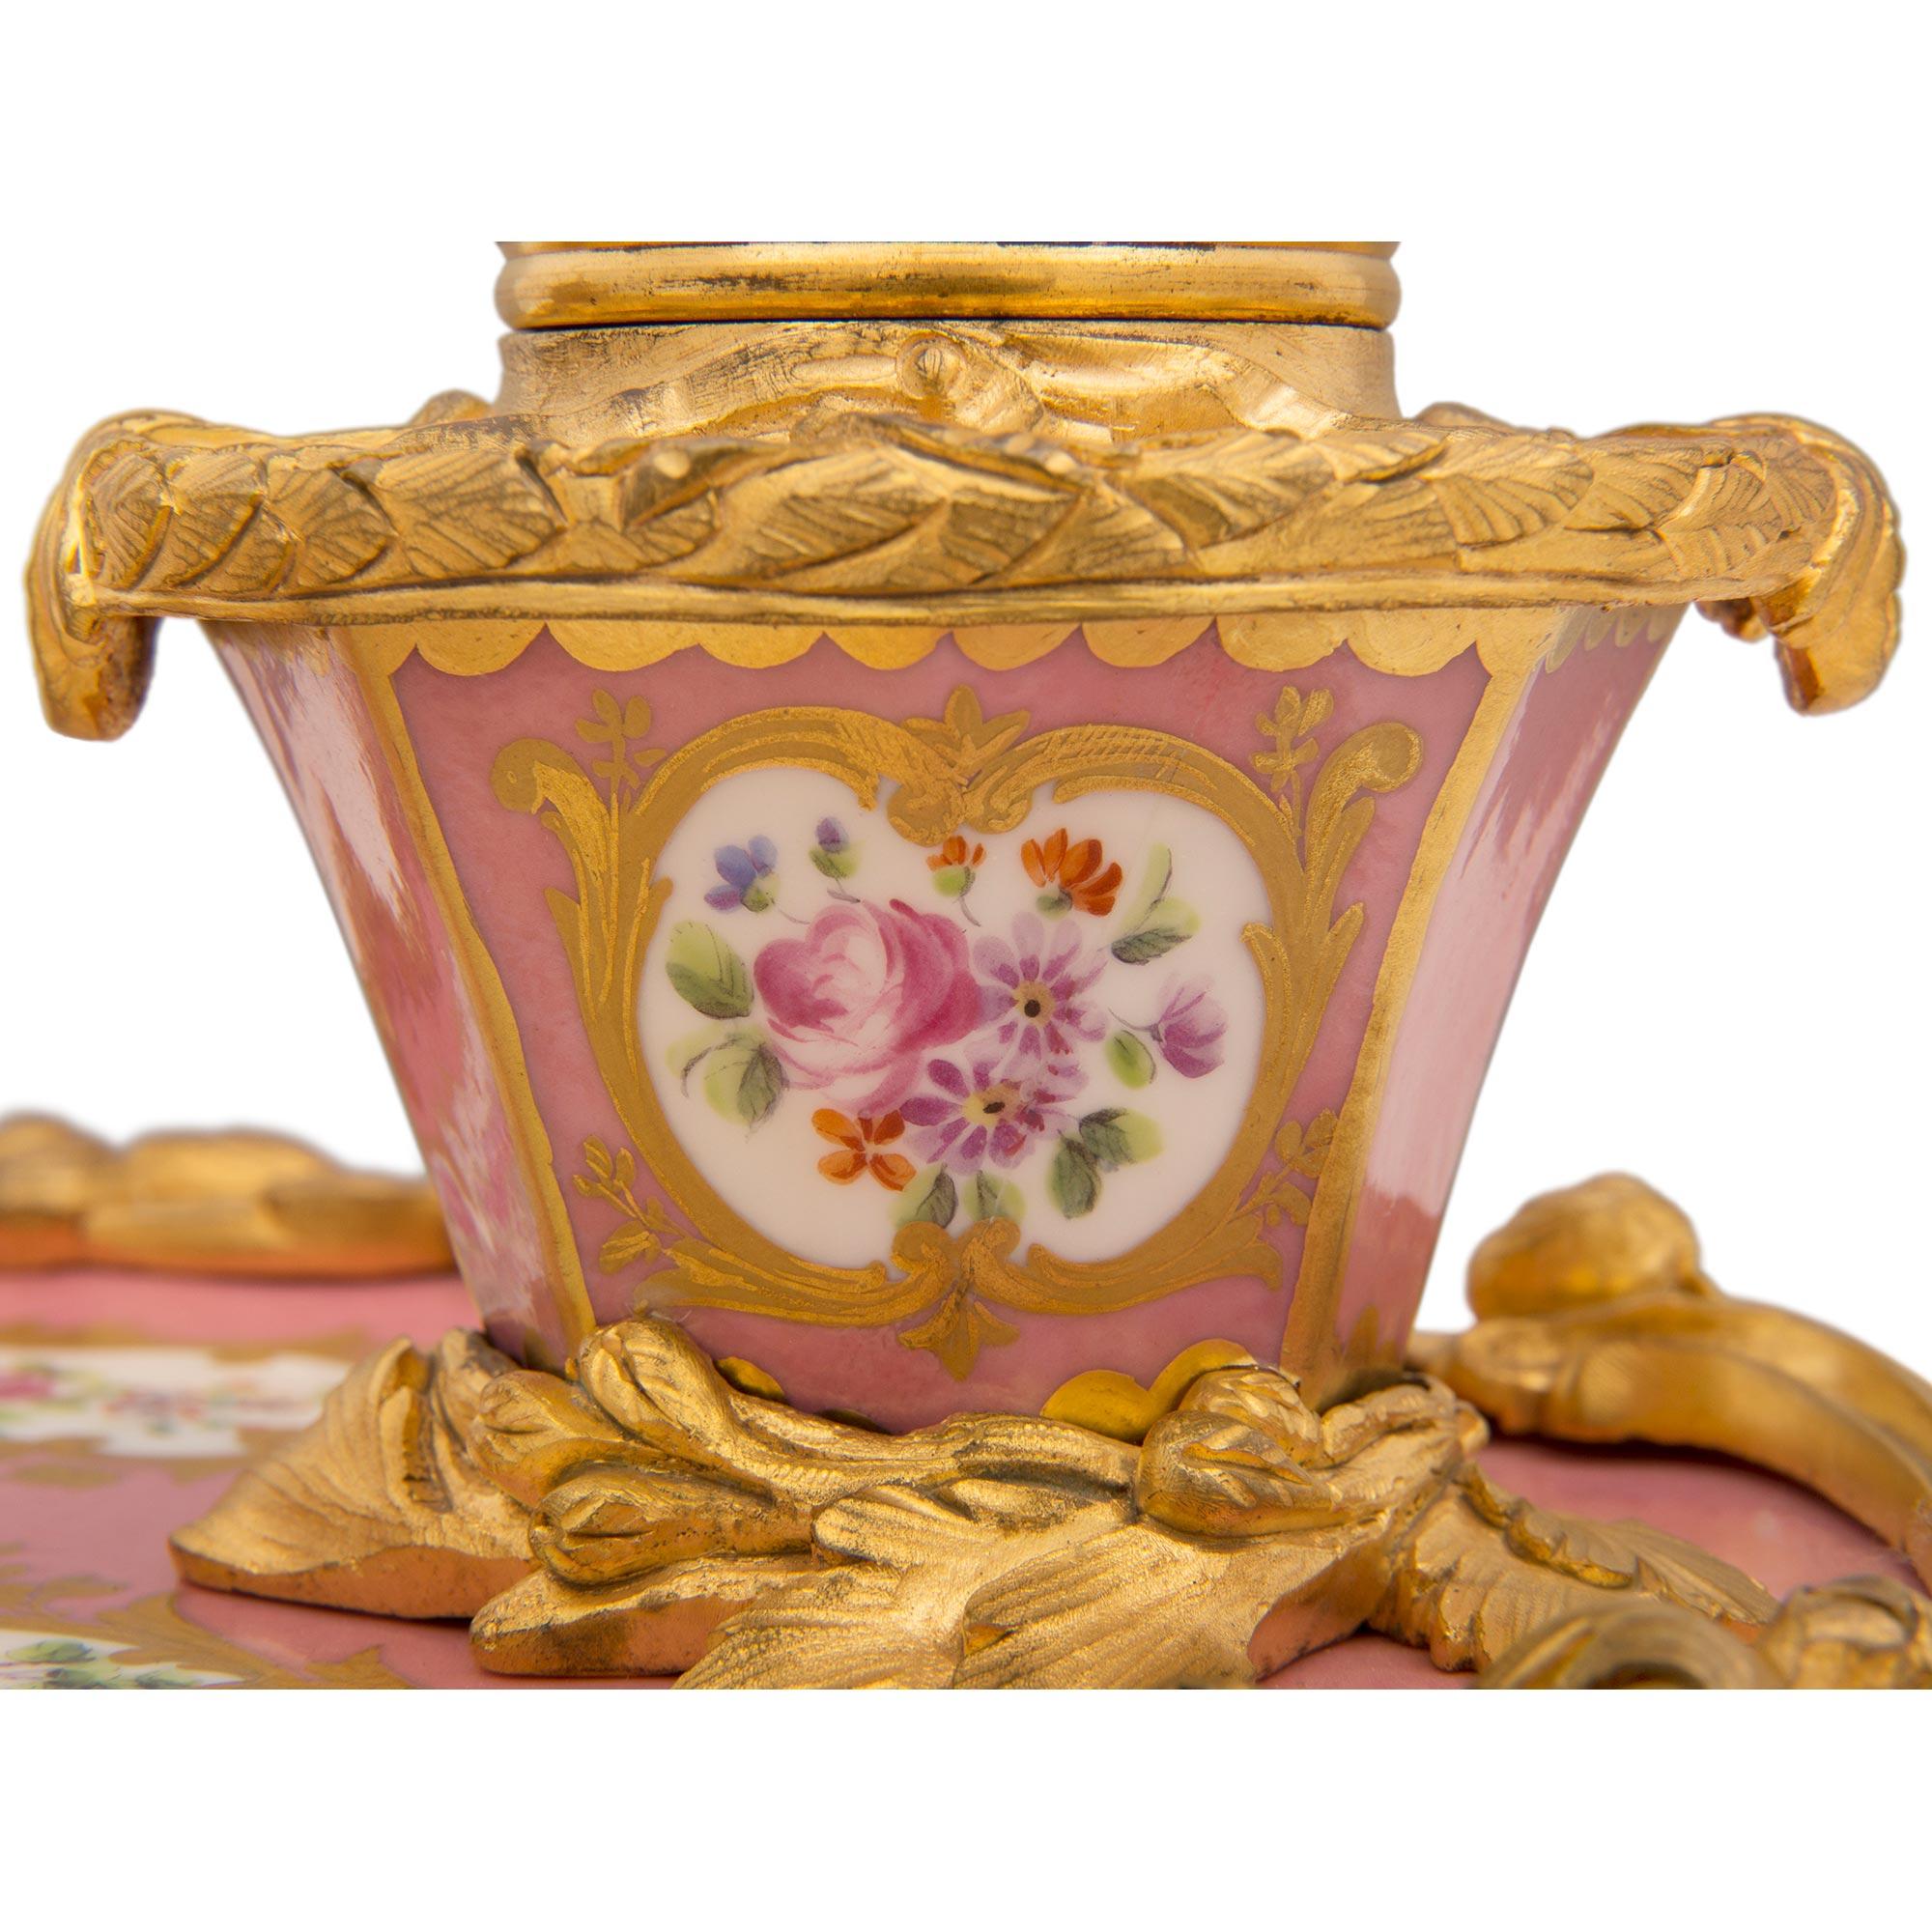  French Early 19th Century Louis XV St. Sèvres Porcelain and Ormolu Inkwell For Sale 2